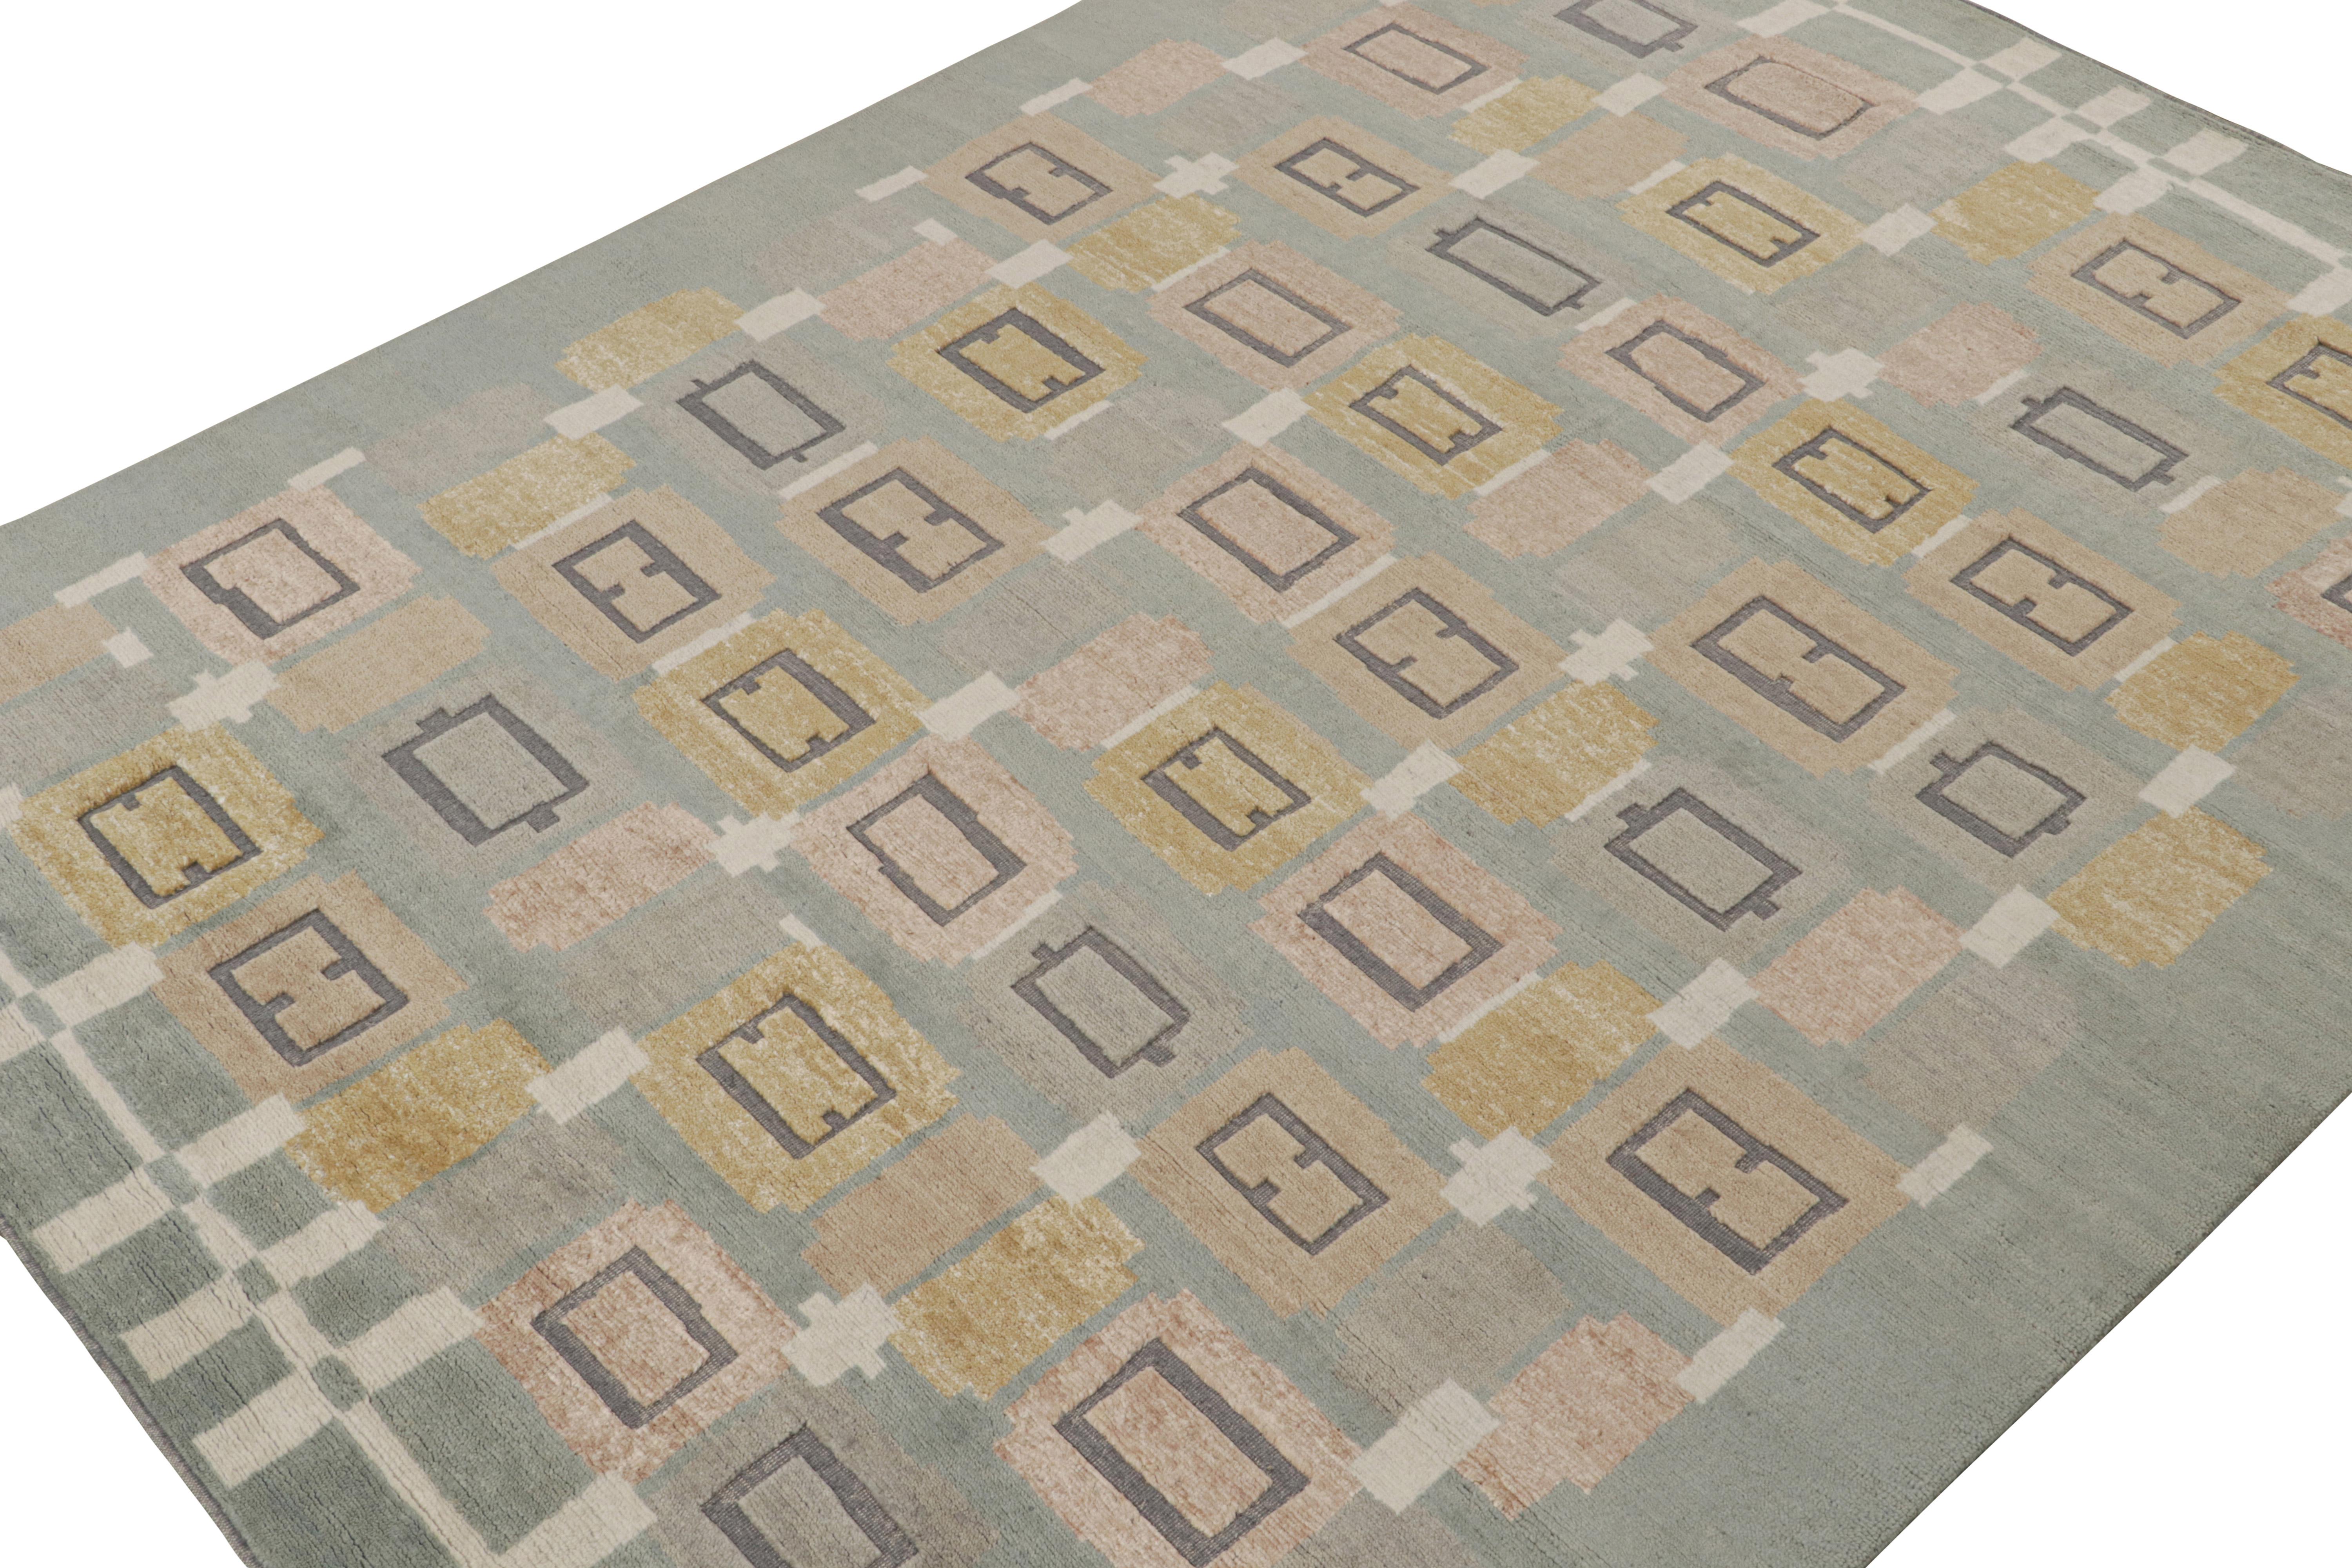 A smart 9x12 Swedish style rug from our award-winning Scandinavian collection. The constitution of the rug enjoys a durable blend of handknotted wool, silk & jute.

On the Design: 

This rug enjoys a high-and-low texture married to geometric